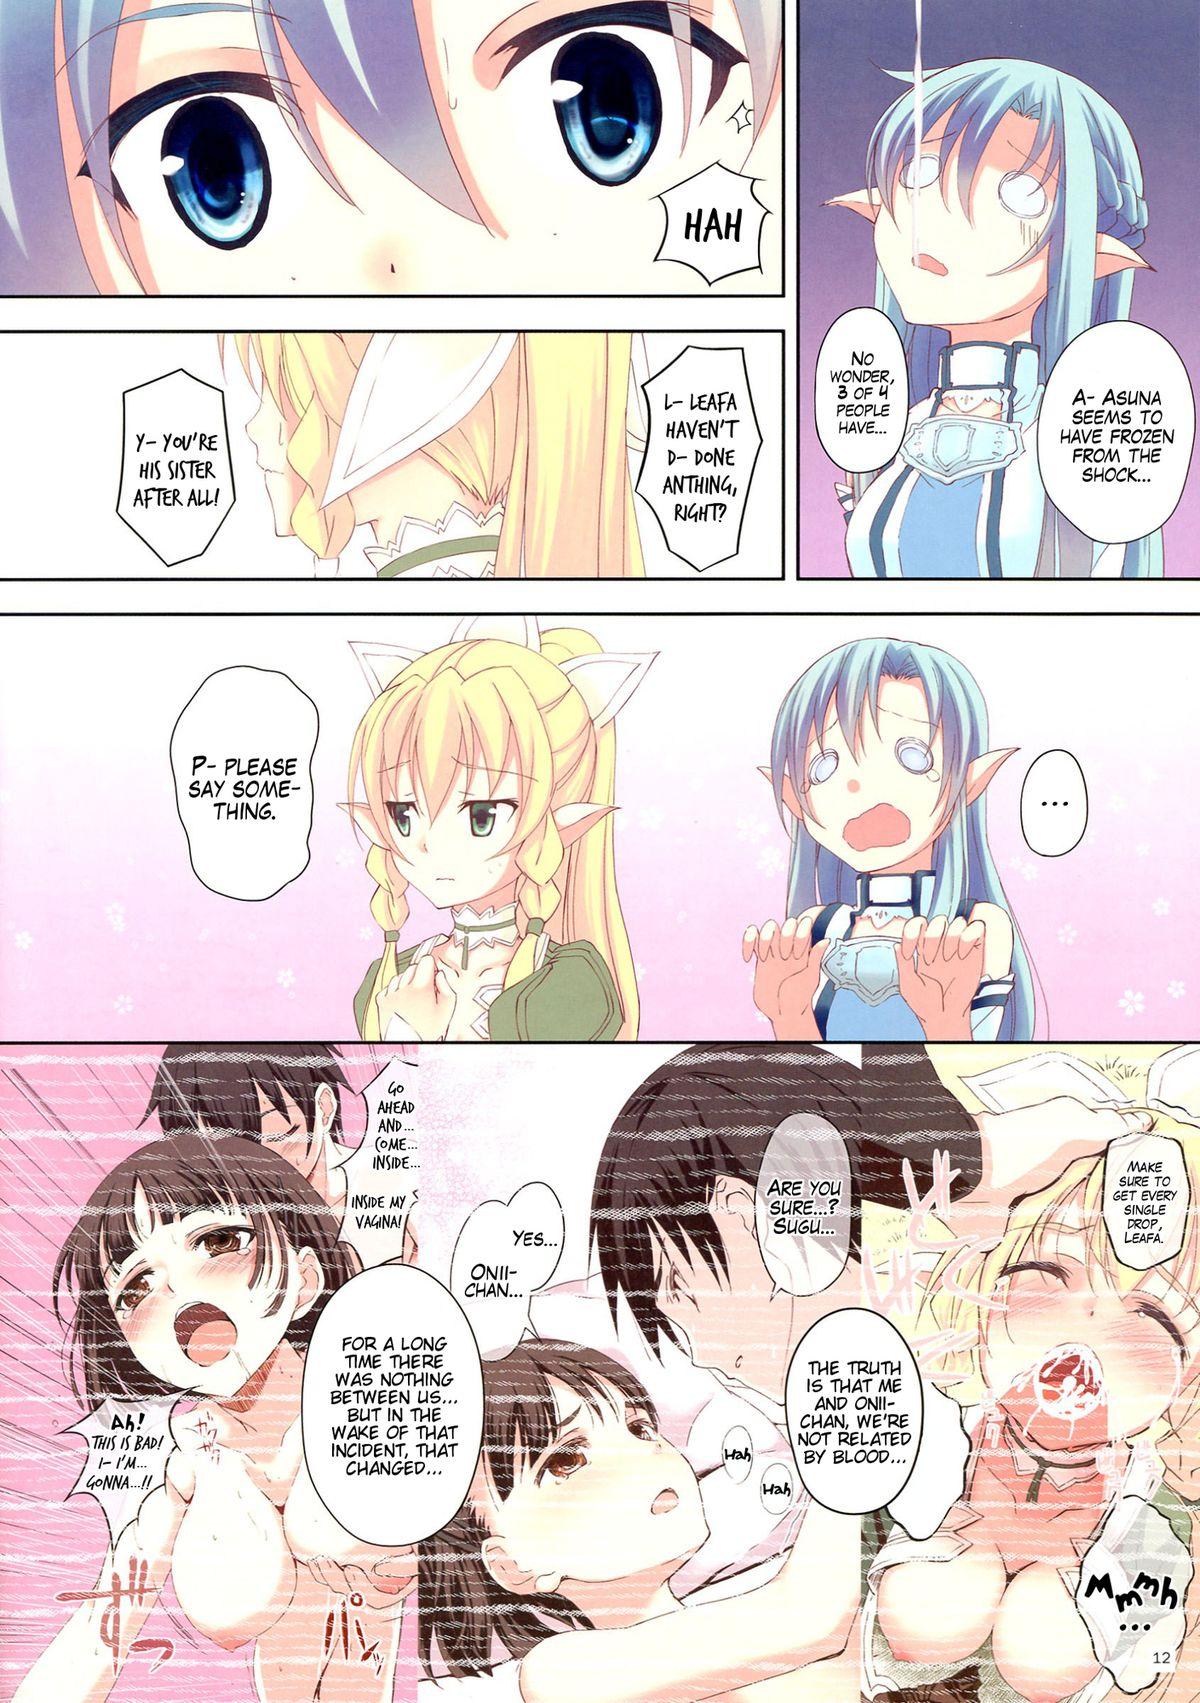 Fat Pussy Mad Tea Party - Sword art online Male - Page 12